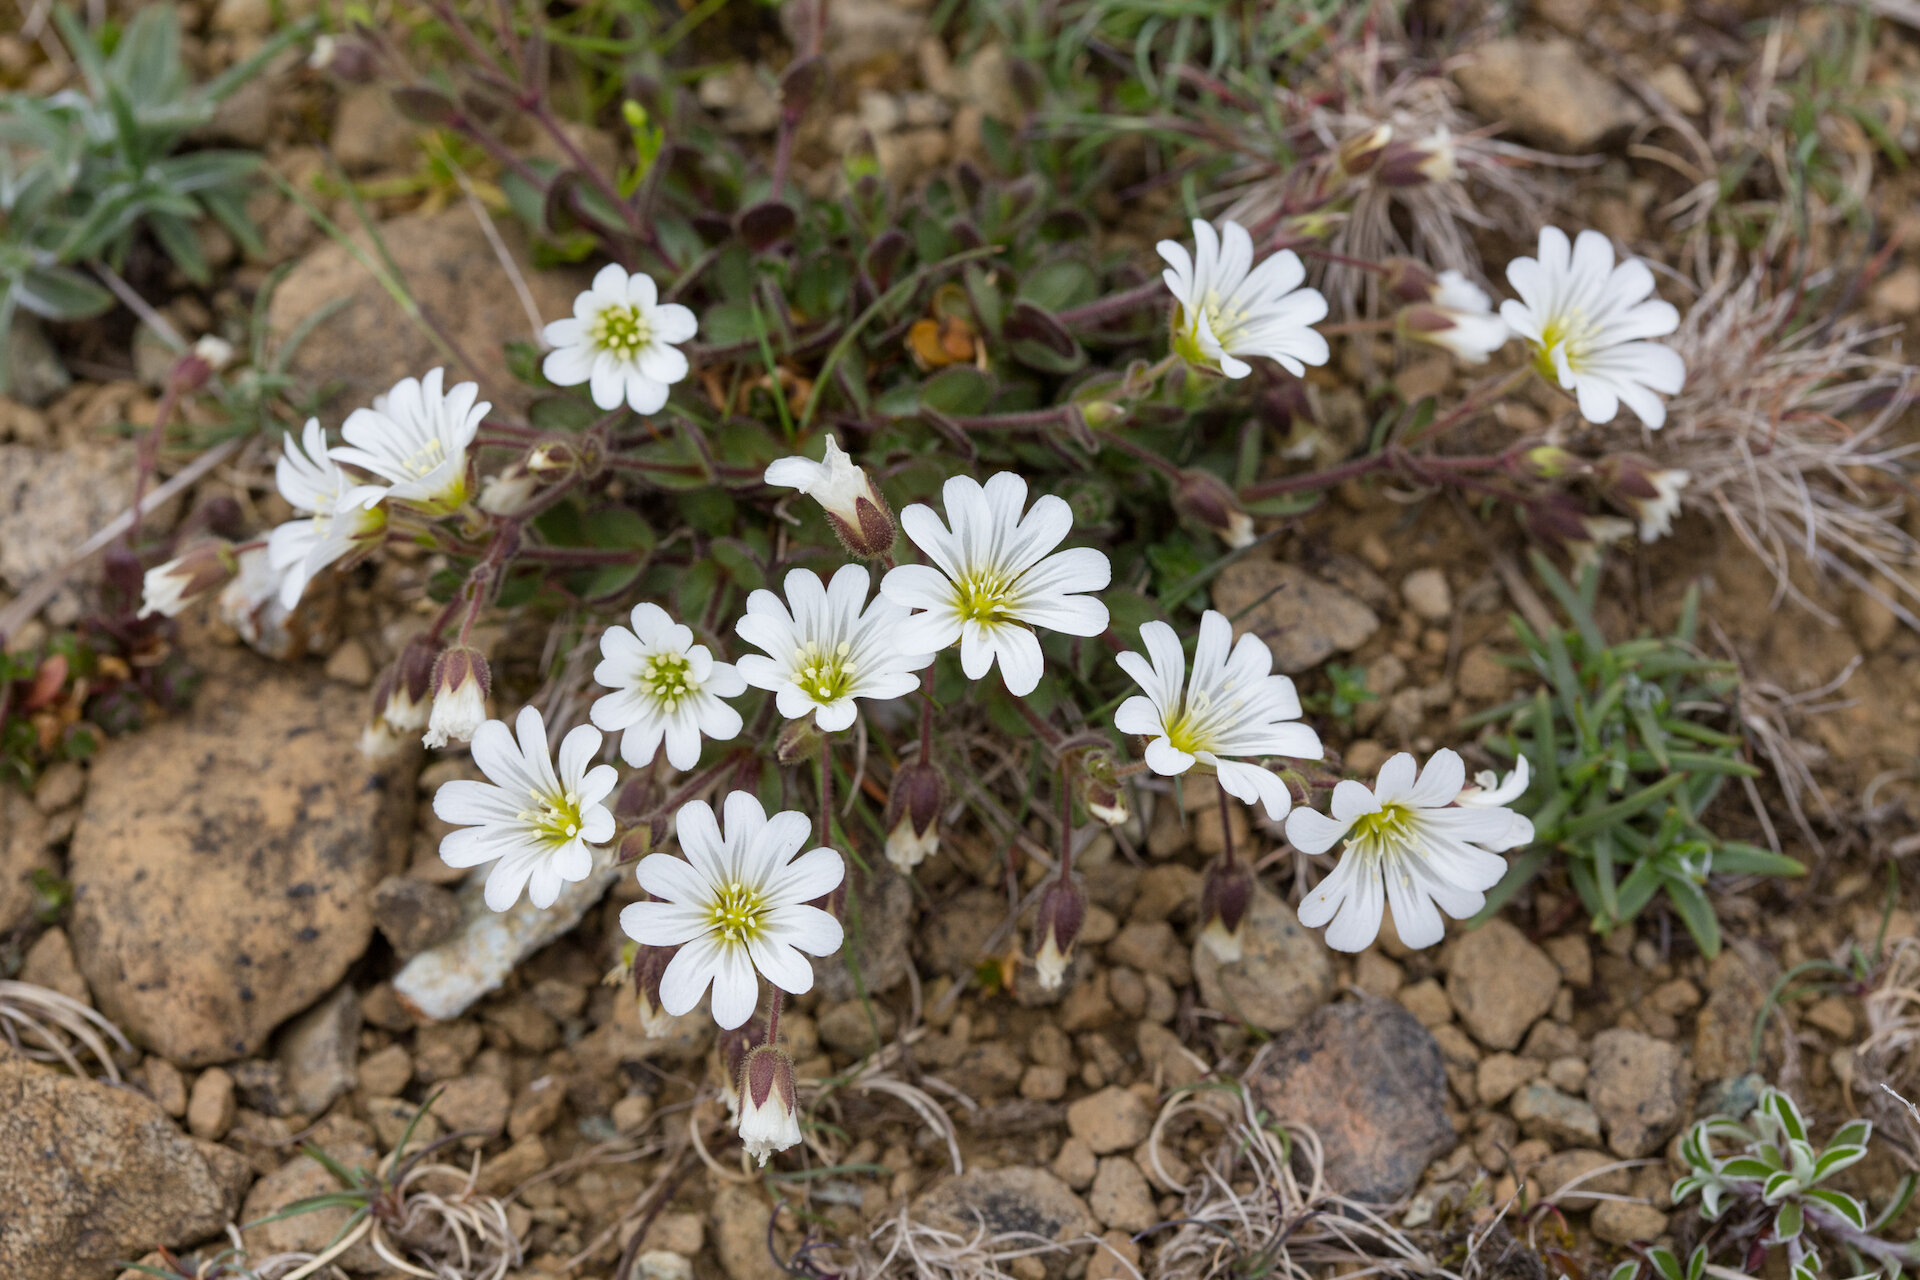 Edmonston's Chickweed is a flower that only grows in Unst